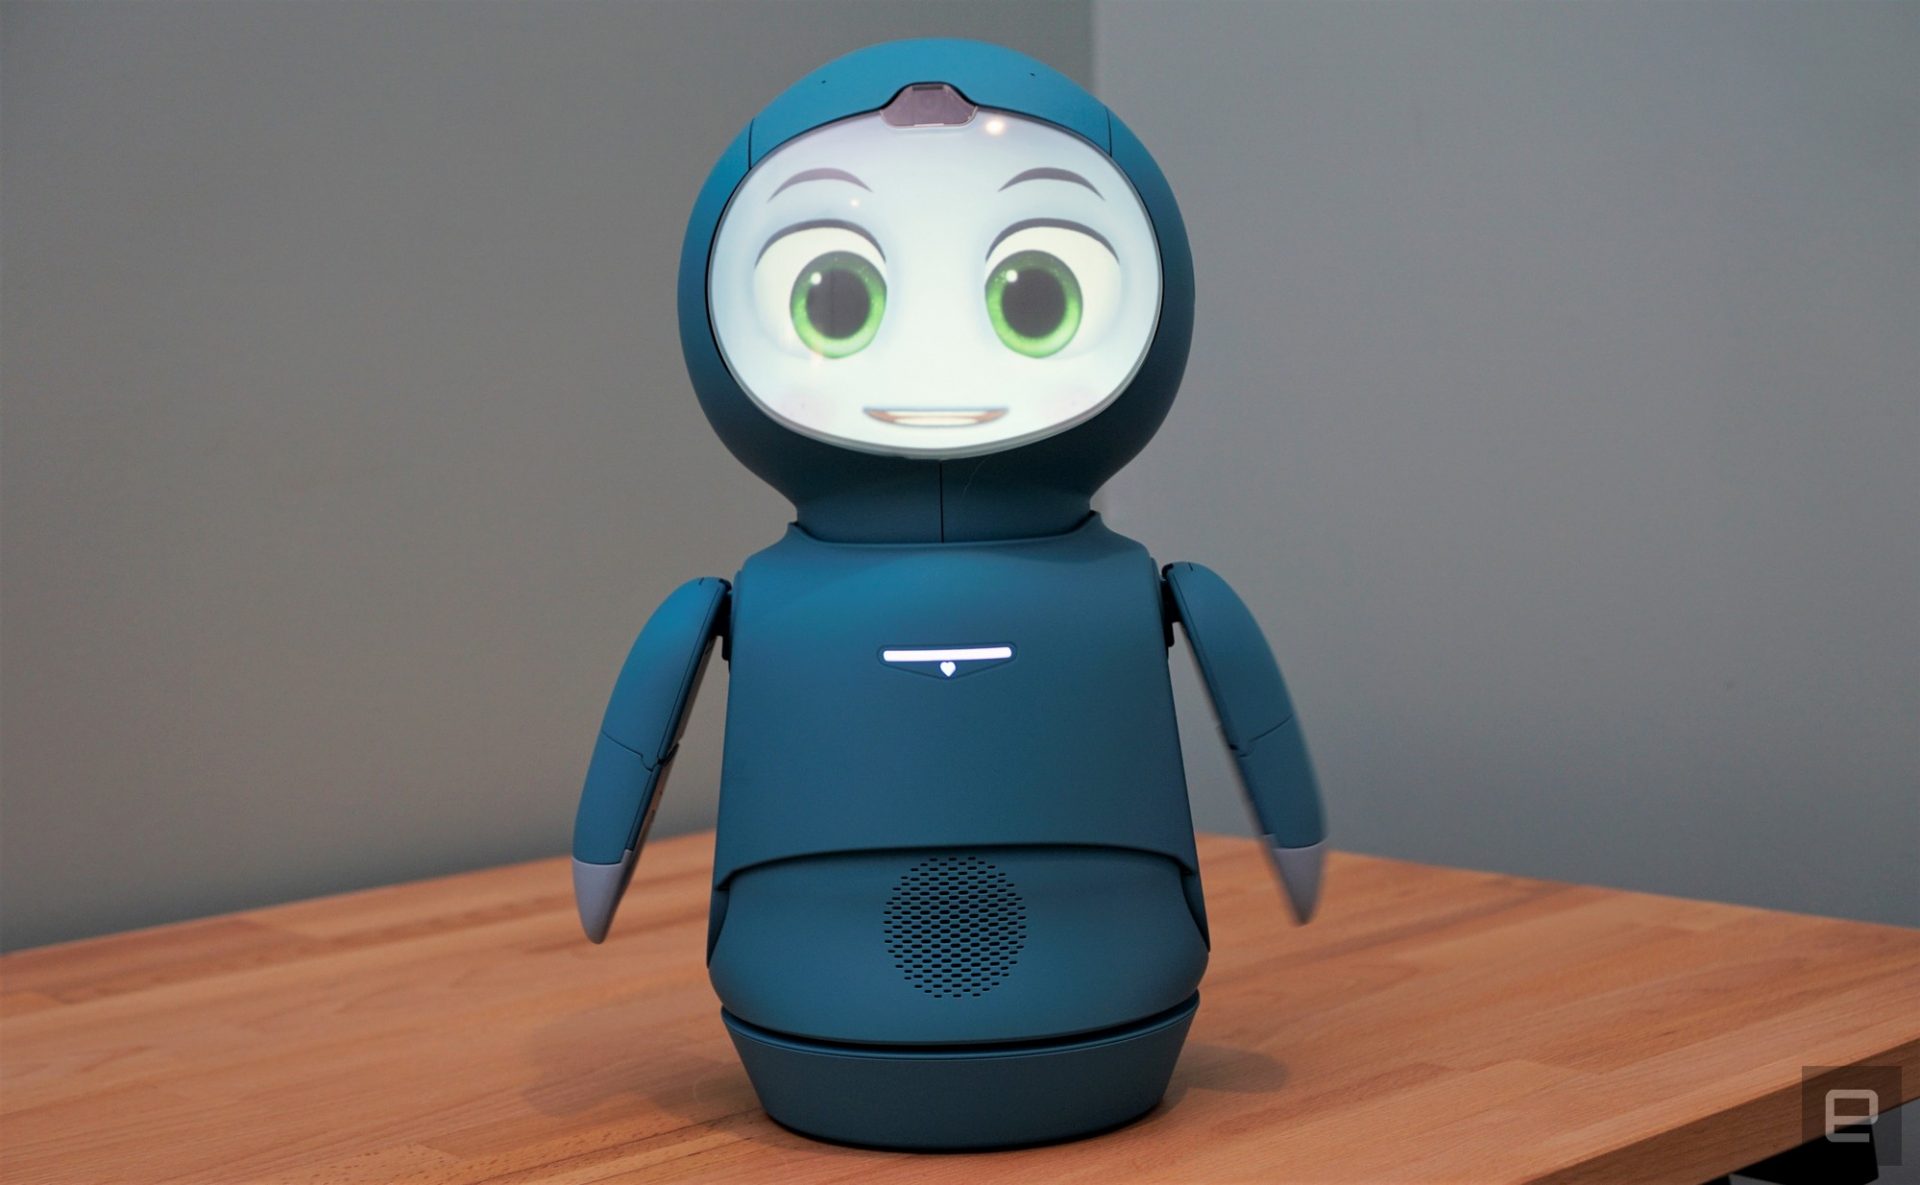 Residing with Moxie, the robot companion for youth